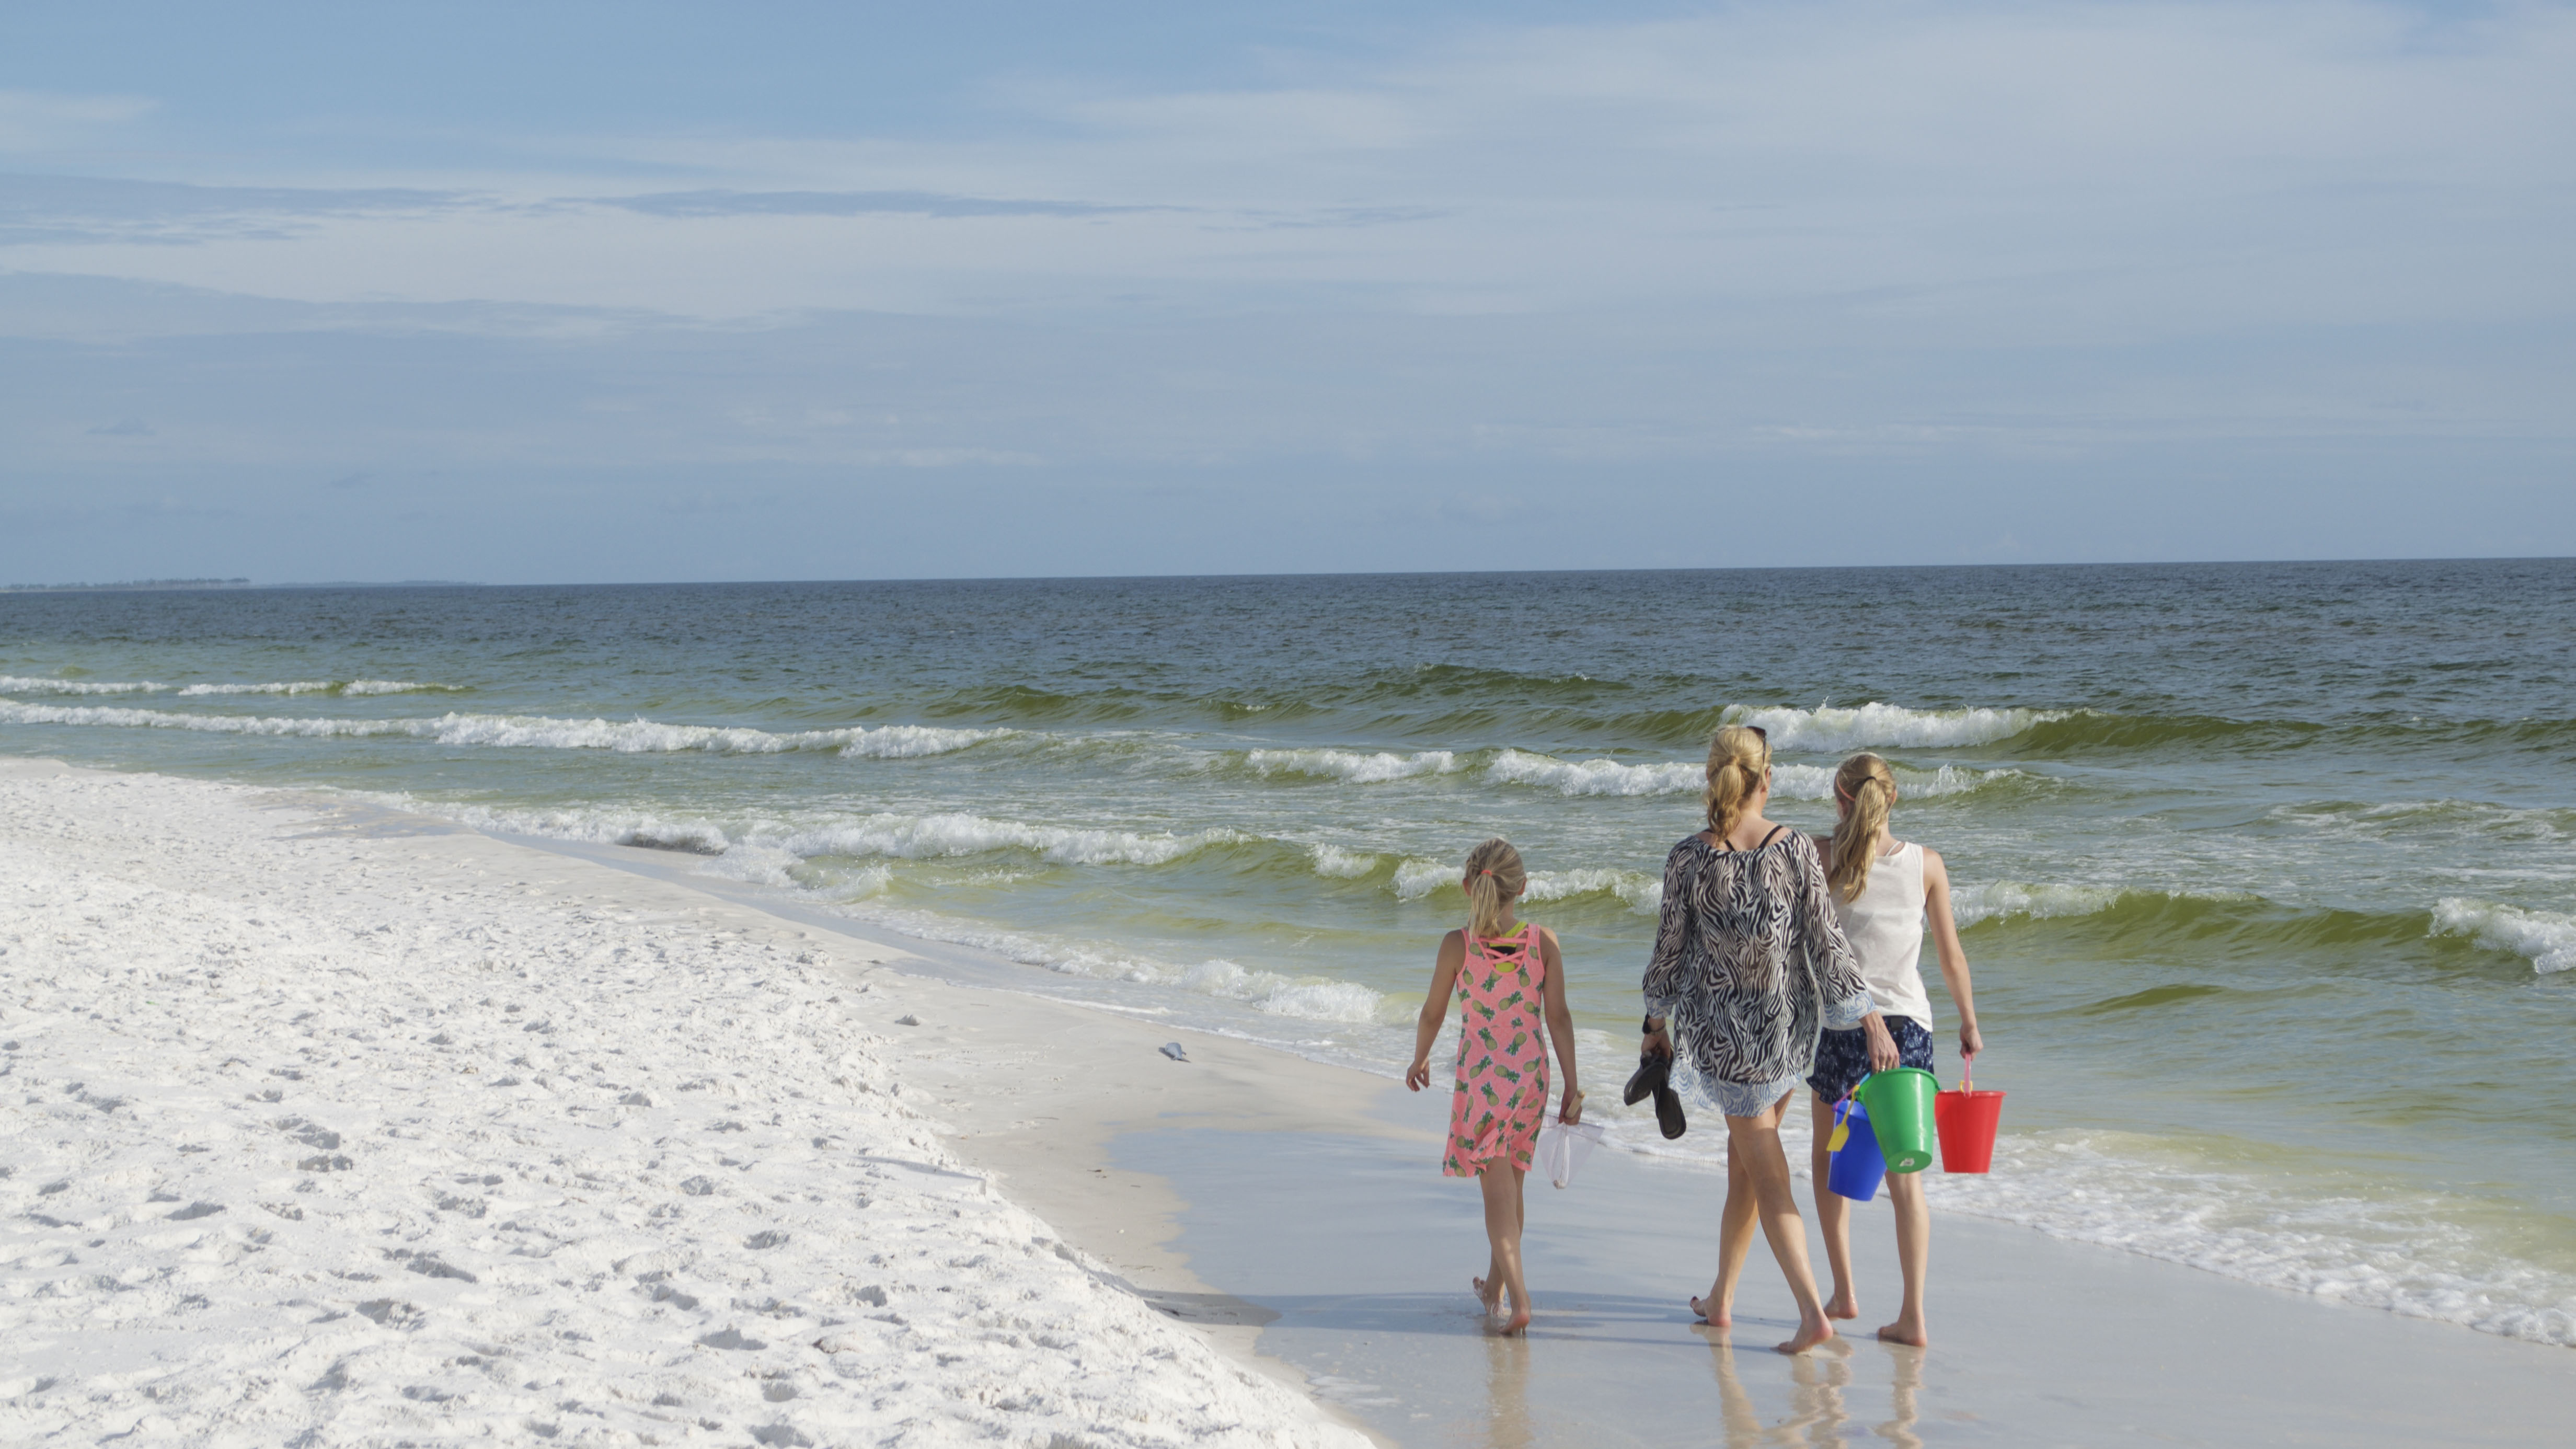 Colleen revisits some of the best family travel moments in the Sunshine State of Florida